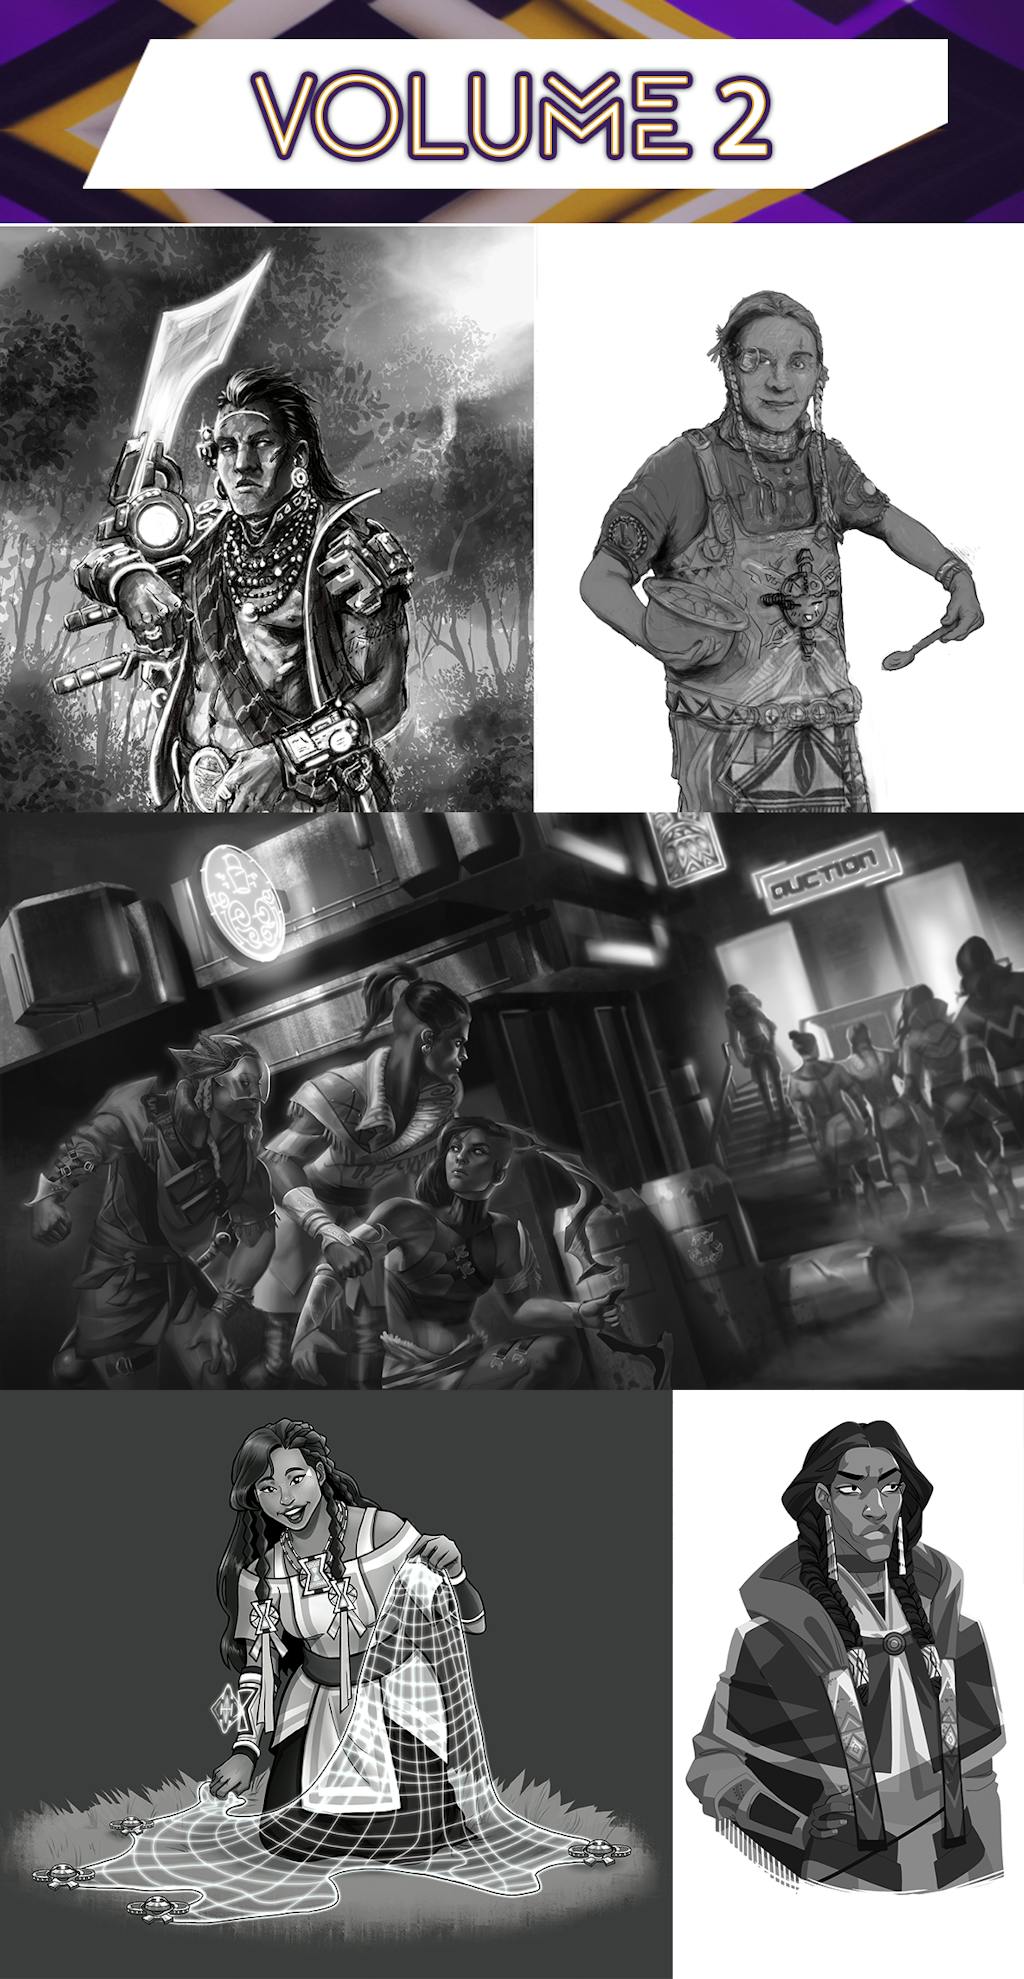 A collage of some of the art from Stories of the Free Lands Volume 2